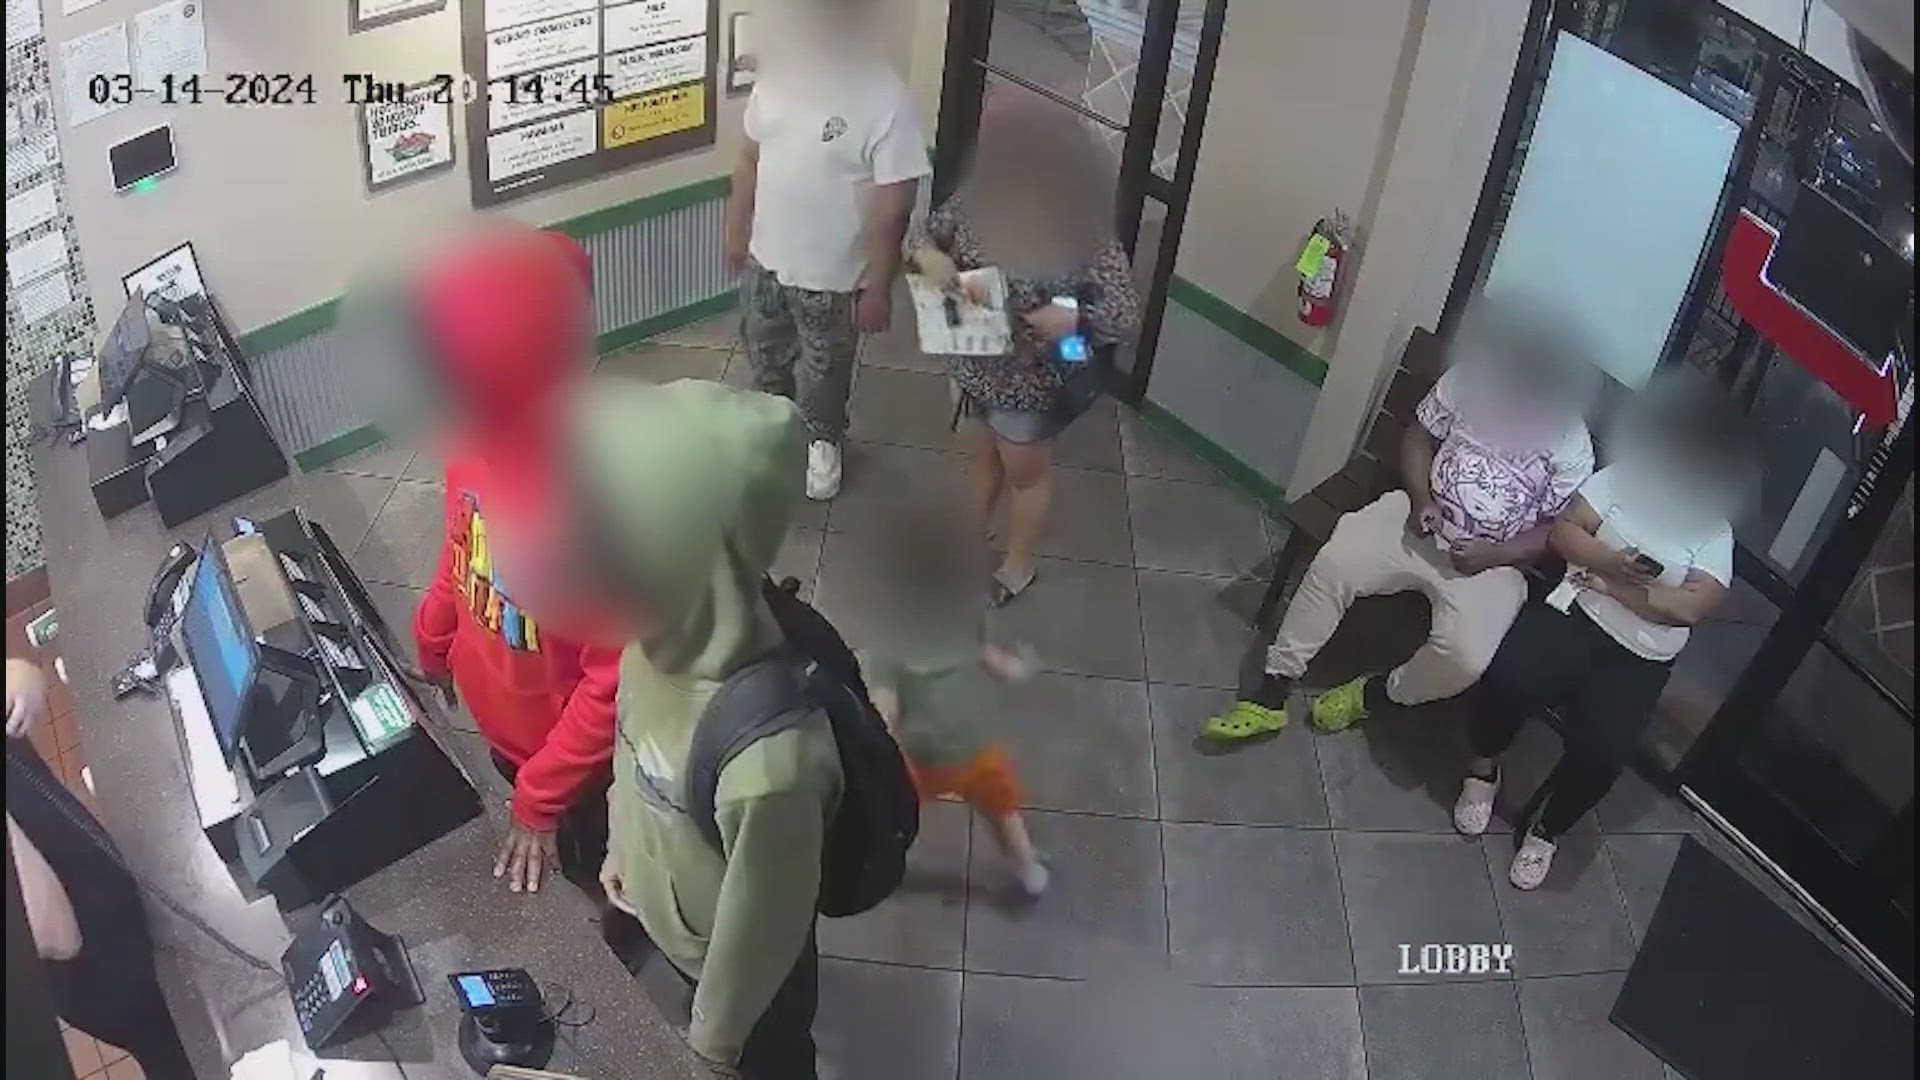 Houston police released video of the two, showing one grab a cash register on the way out.